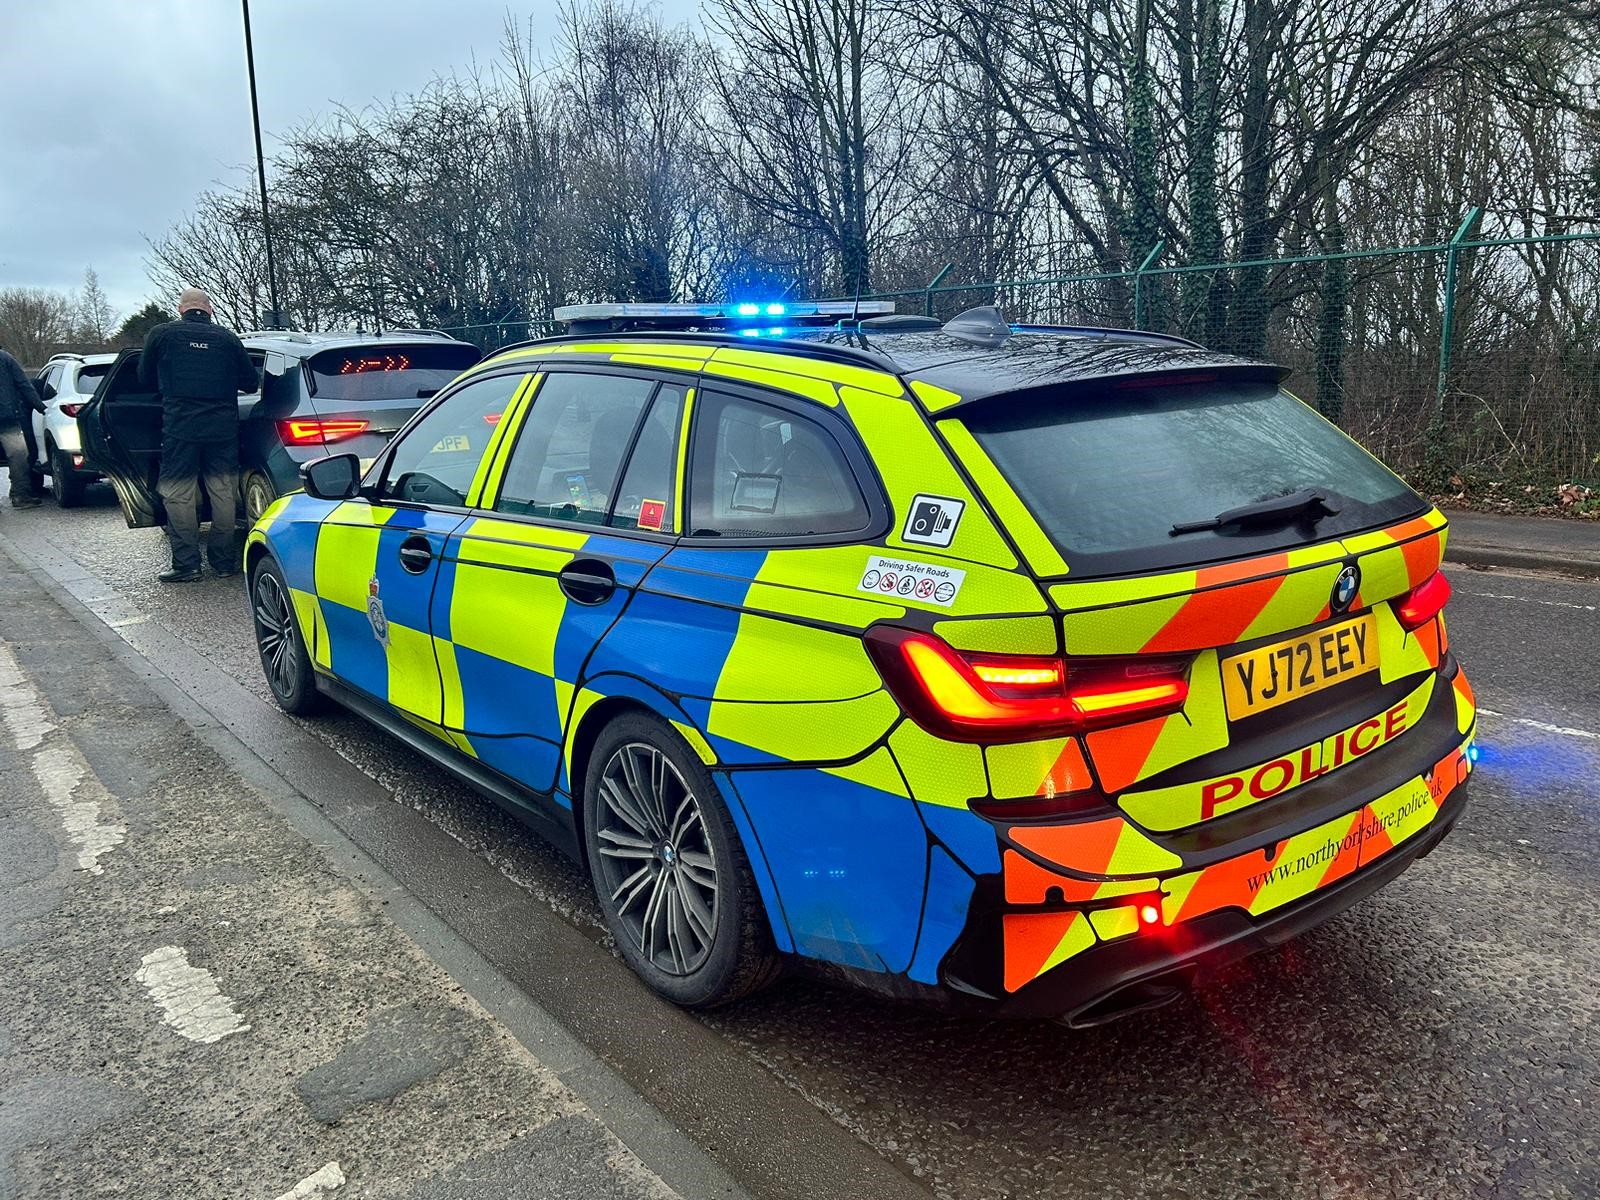 North Yorkshire Police and Merseyside Police stop a vehicle in York